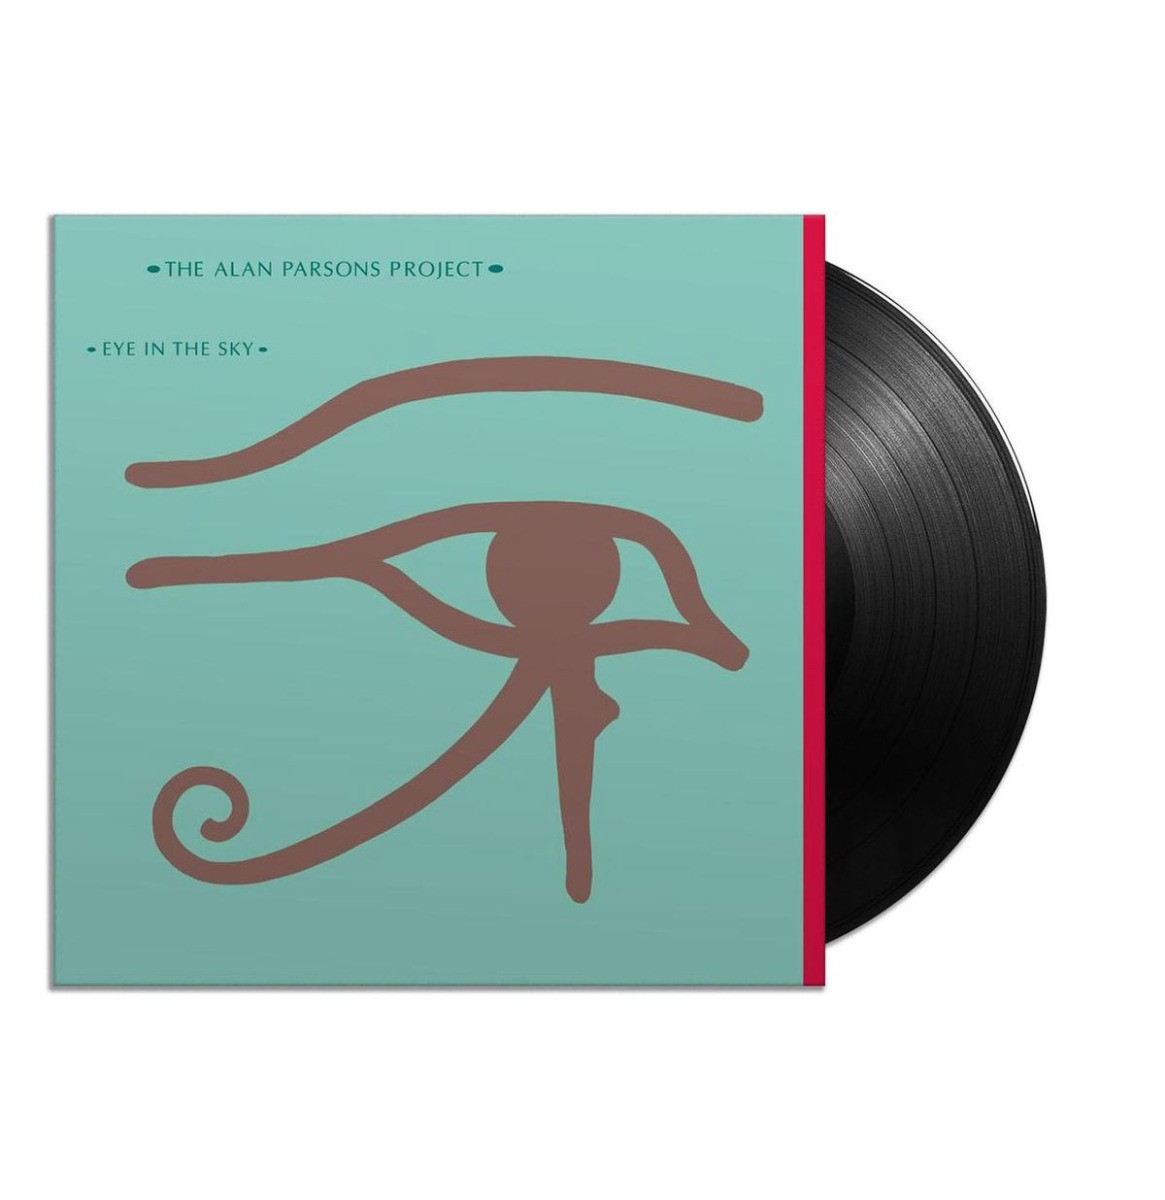 The Alan Parsons Project - Eye In The Sky LP